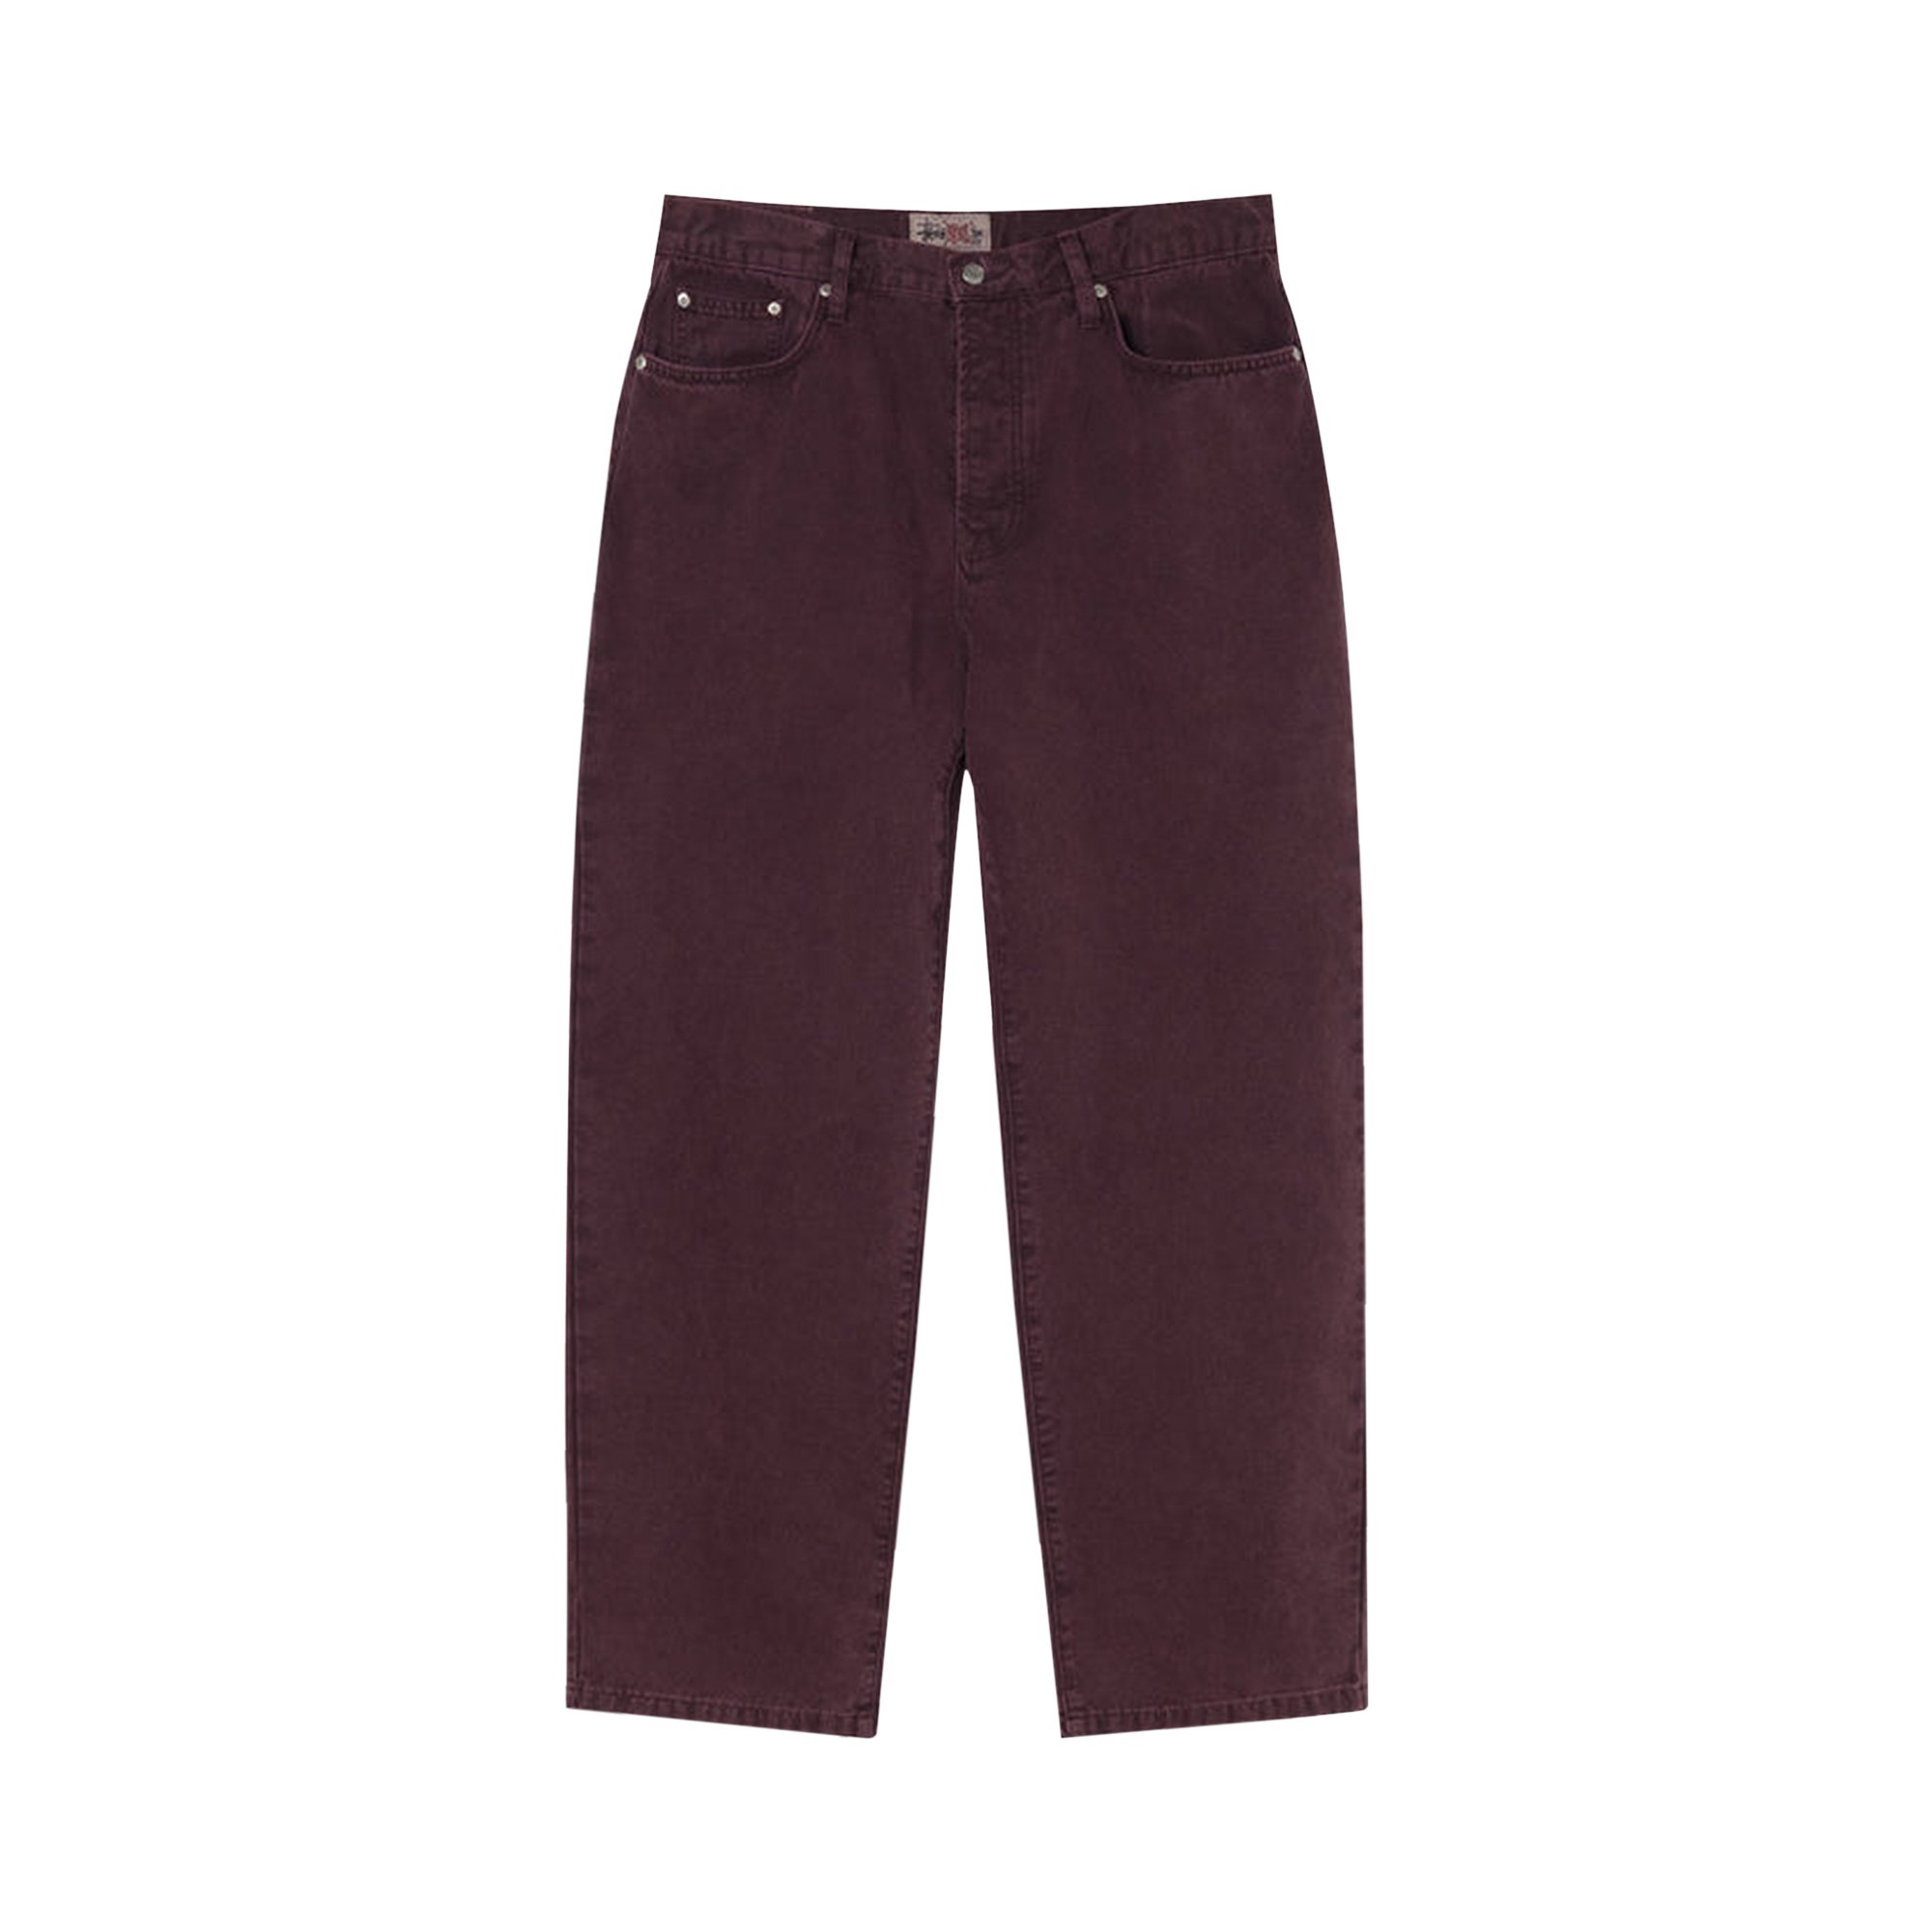 Buy Stussy Washed Canvas Big Ol' Jeans 'Purple' - 116568 PURP | GOAT